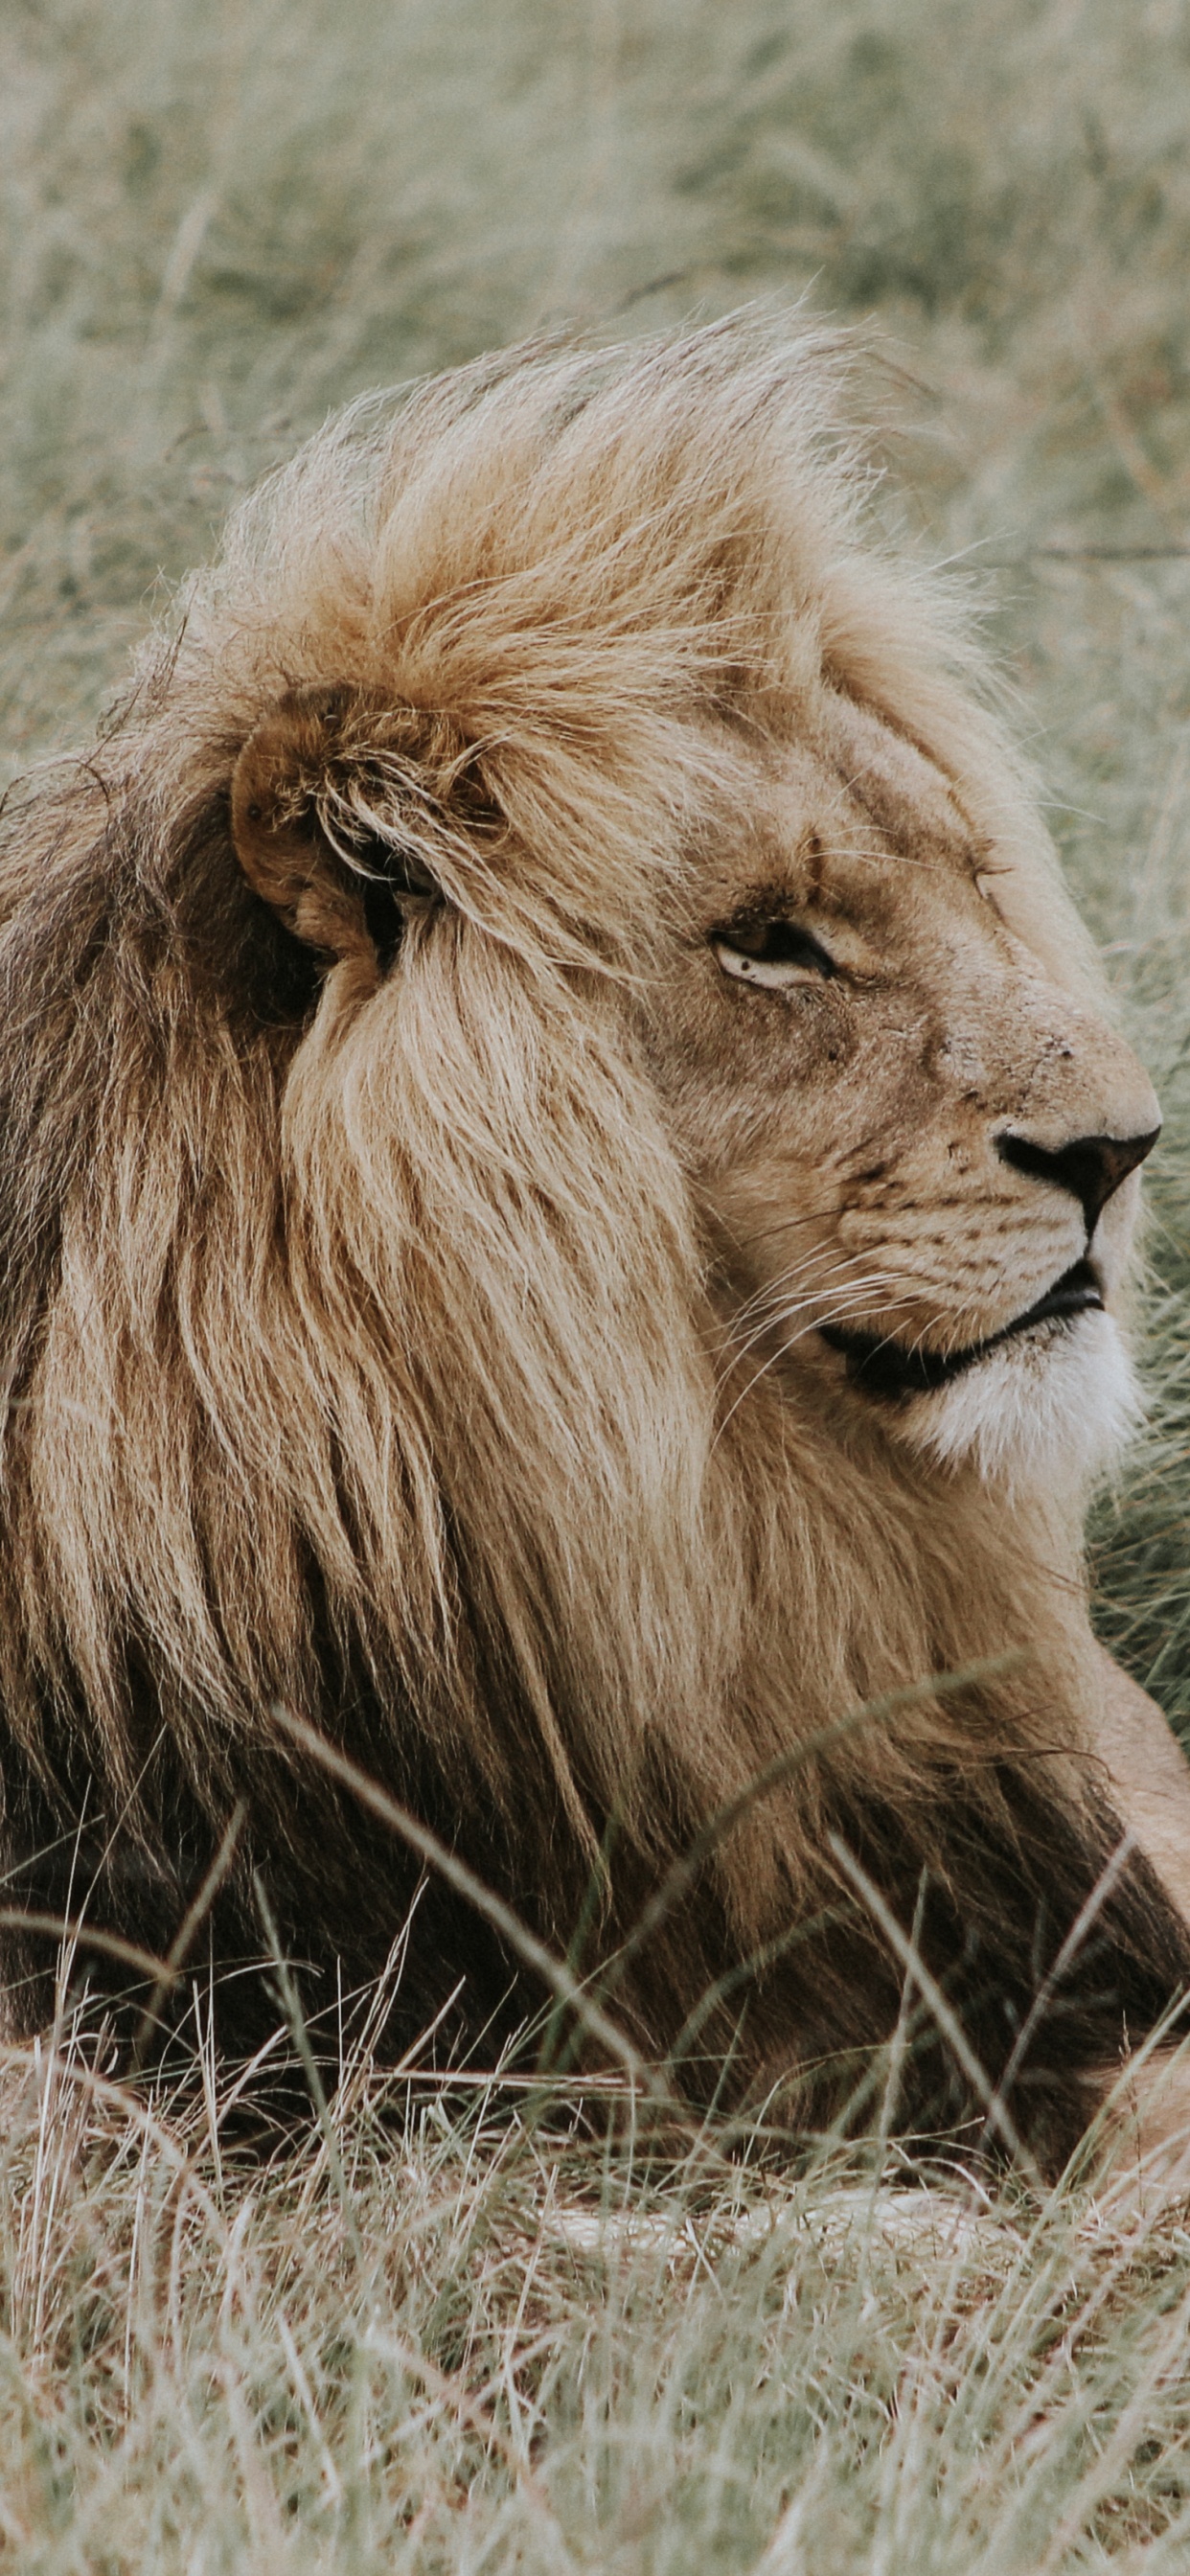 Lion Lying on Brown Grass During Daytime. Wallpaper in 1242x2688 Resolution